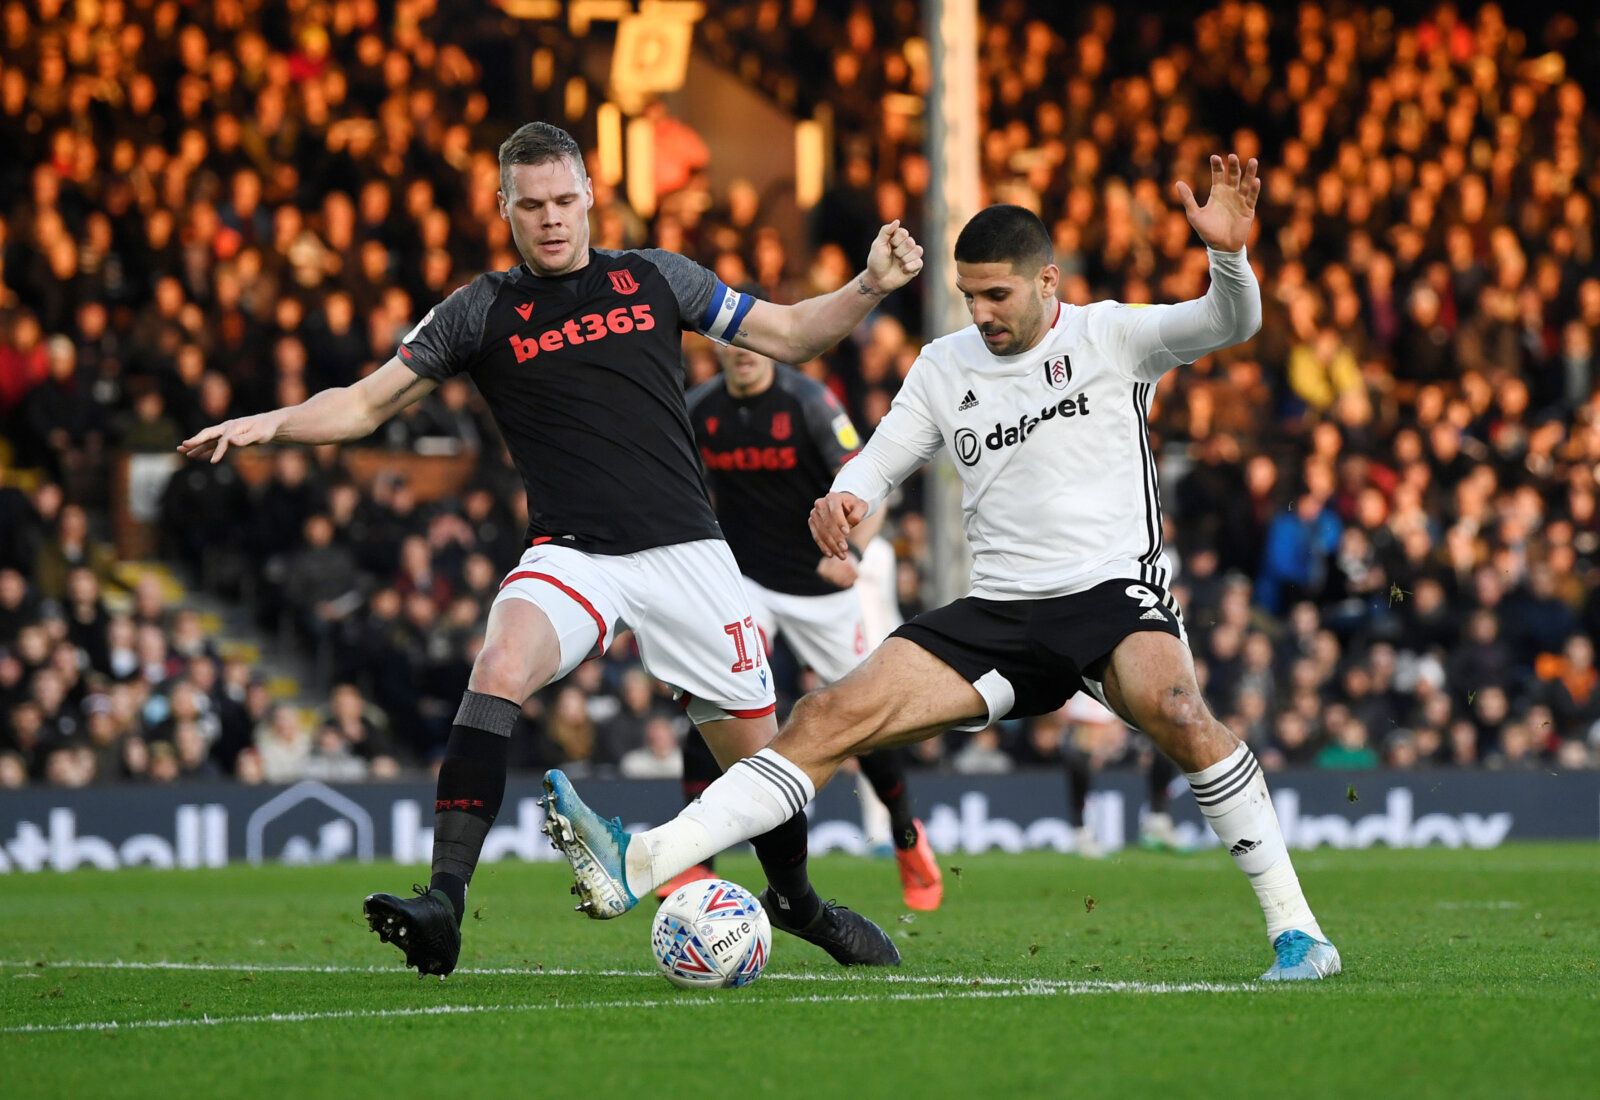 Soccer Football - Championship - Fulham v Stoke City - Craven Cottage, London, Britain - December 29, 2019  Fulham's Aleksandar Mitrovic in action with Stoke's Ryan Shawcross  Action Images/Tony O'Brien  EDITORIAL USE ONLY. No use with unauthorized audio, video, data, fixture lists, club/league logos or 